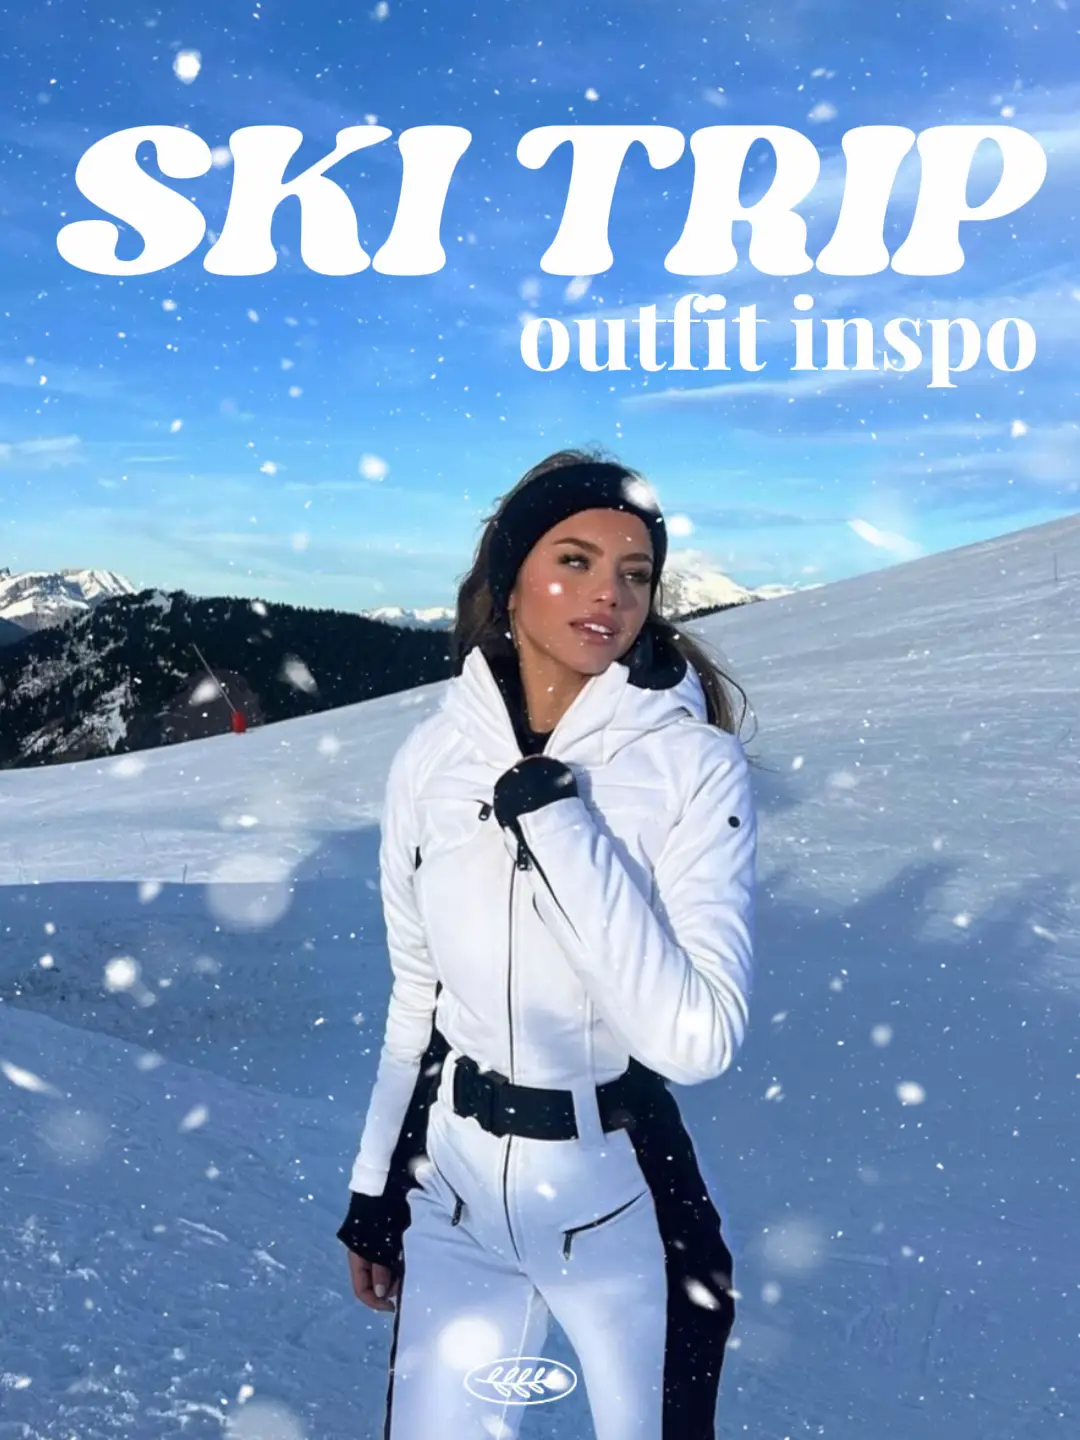 25 Chic Ski Outfits To Wear On The Slopes  Ski outfit for women, Skiing  outfit, Cute ski outfits for women